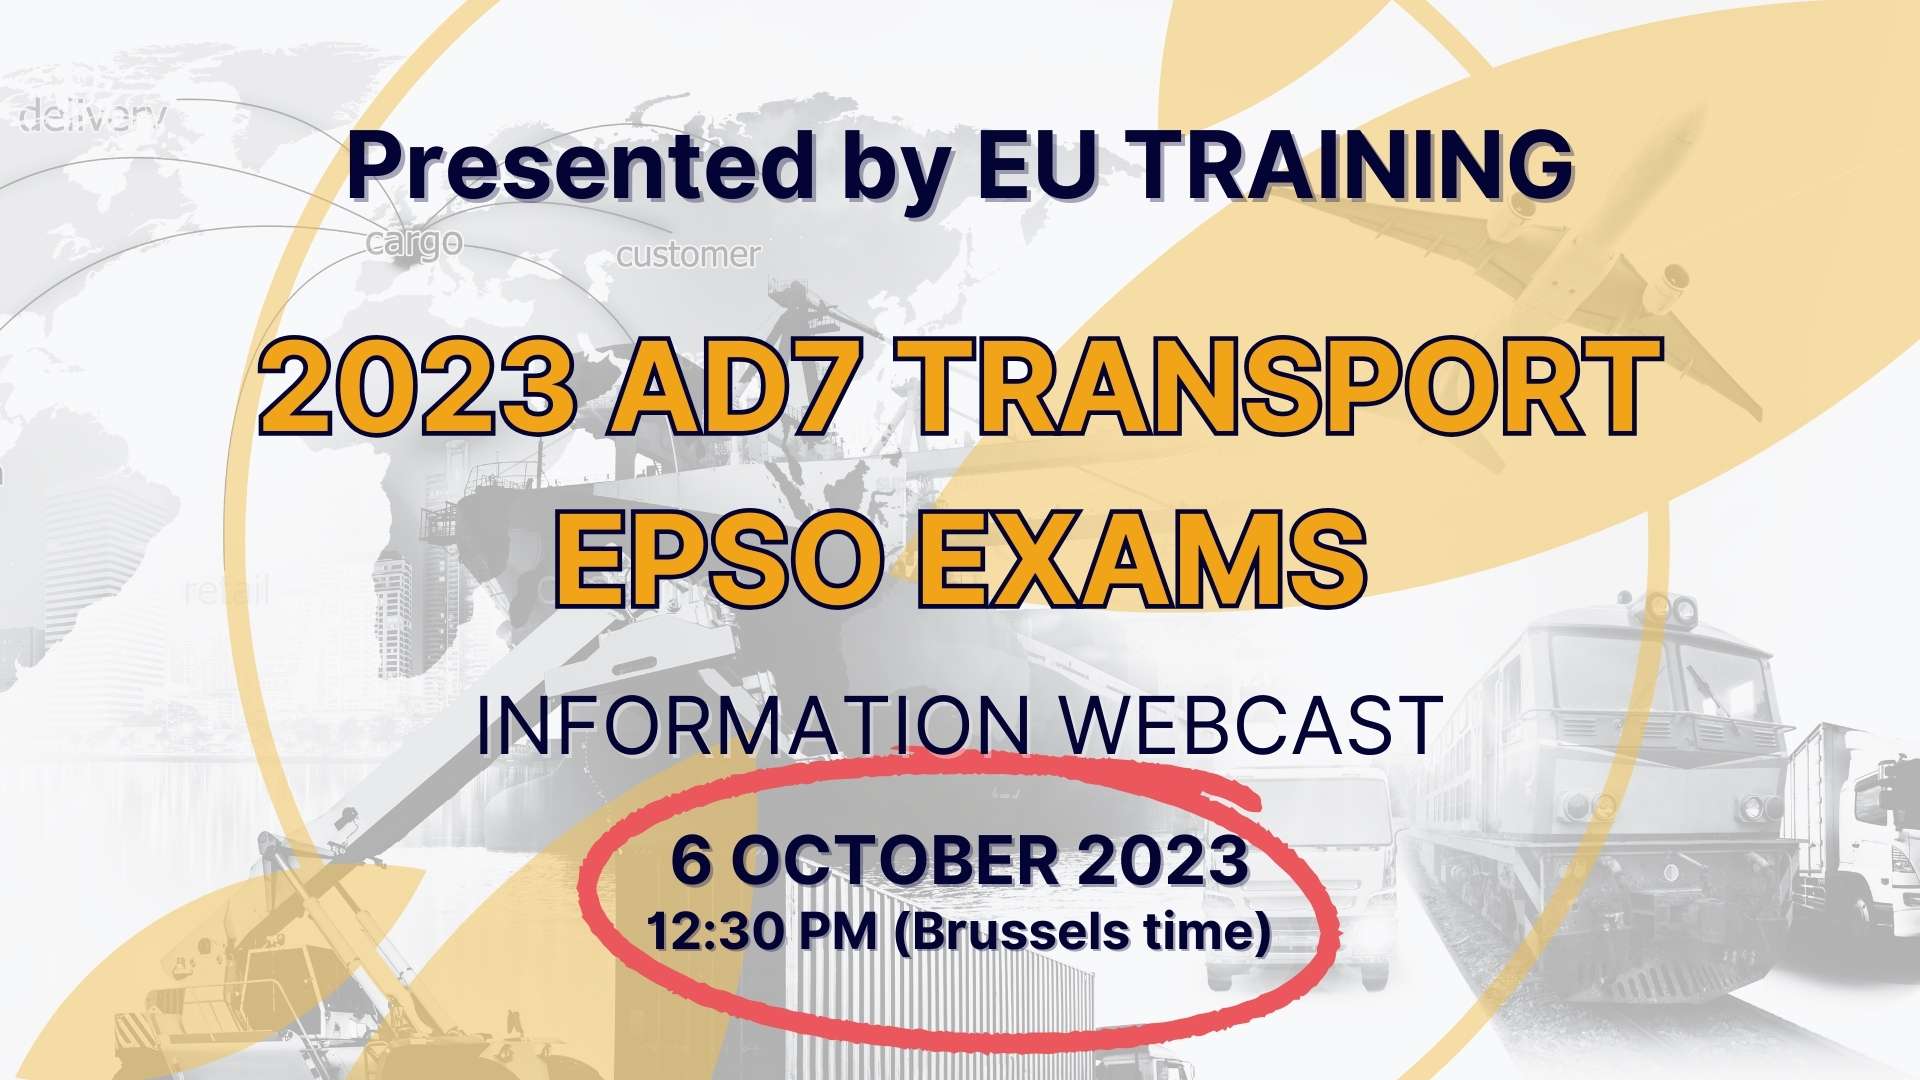 Join EU Training's free, live webcast to find out all about the EPSO Transport exams